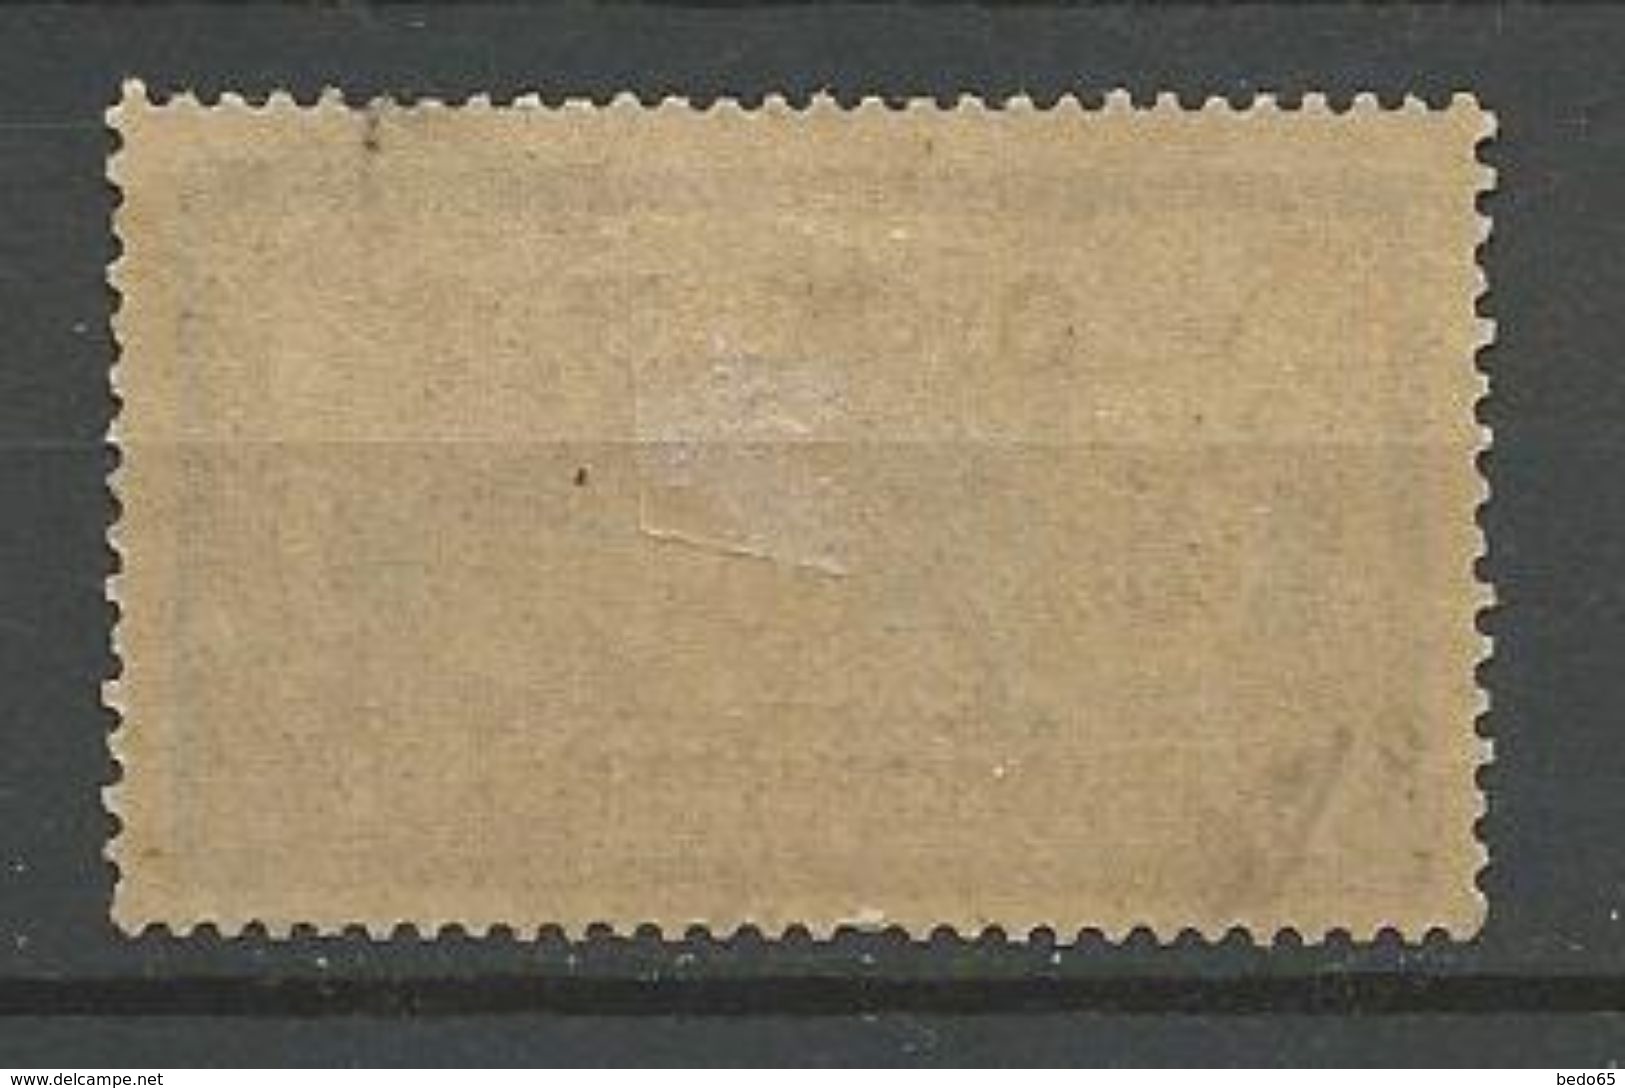 CILICIE N° 97 TYPE II 2ème TIRAGE NEUF* TRACE DE CHARNIERE MH  / Signé CALVES - Unused Stamps